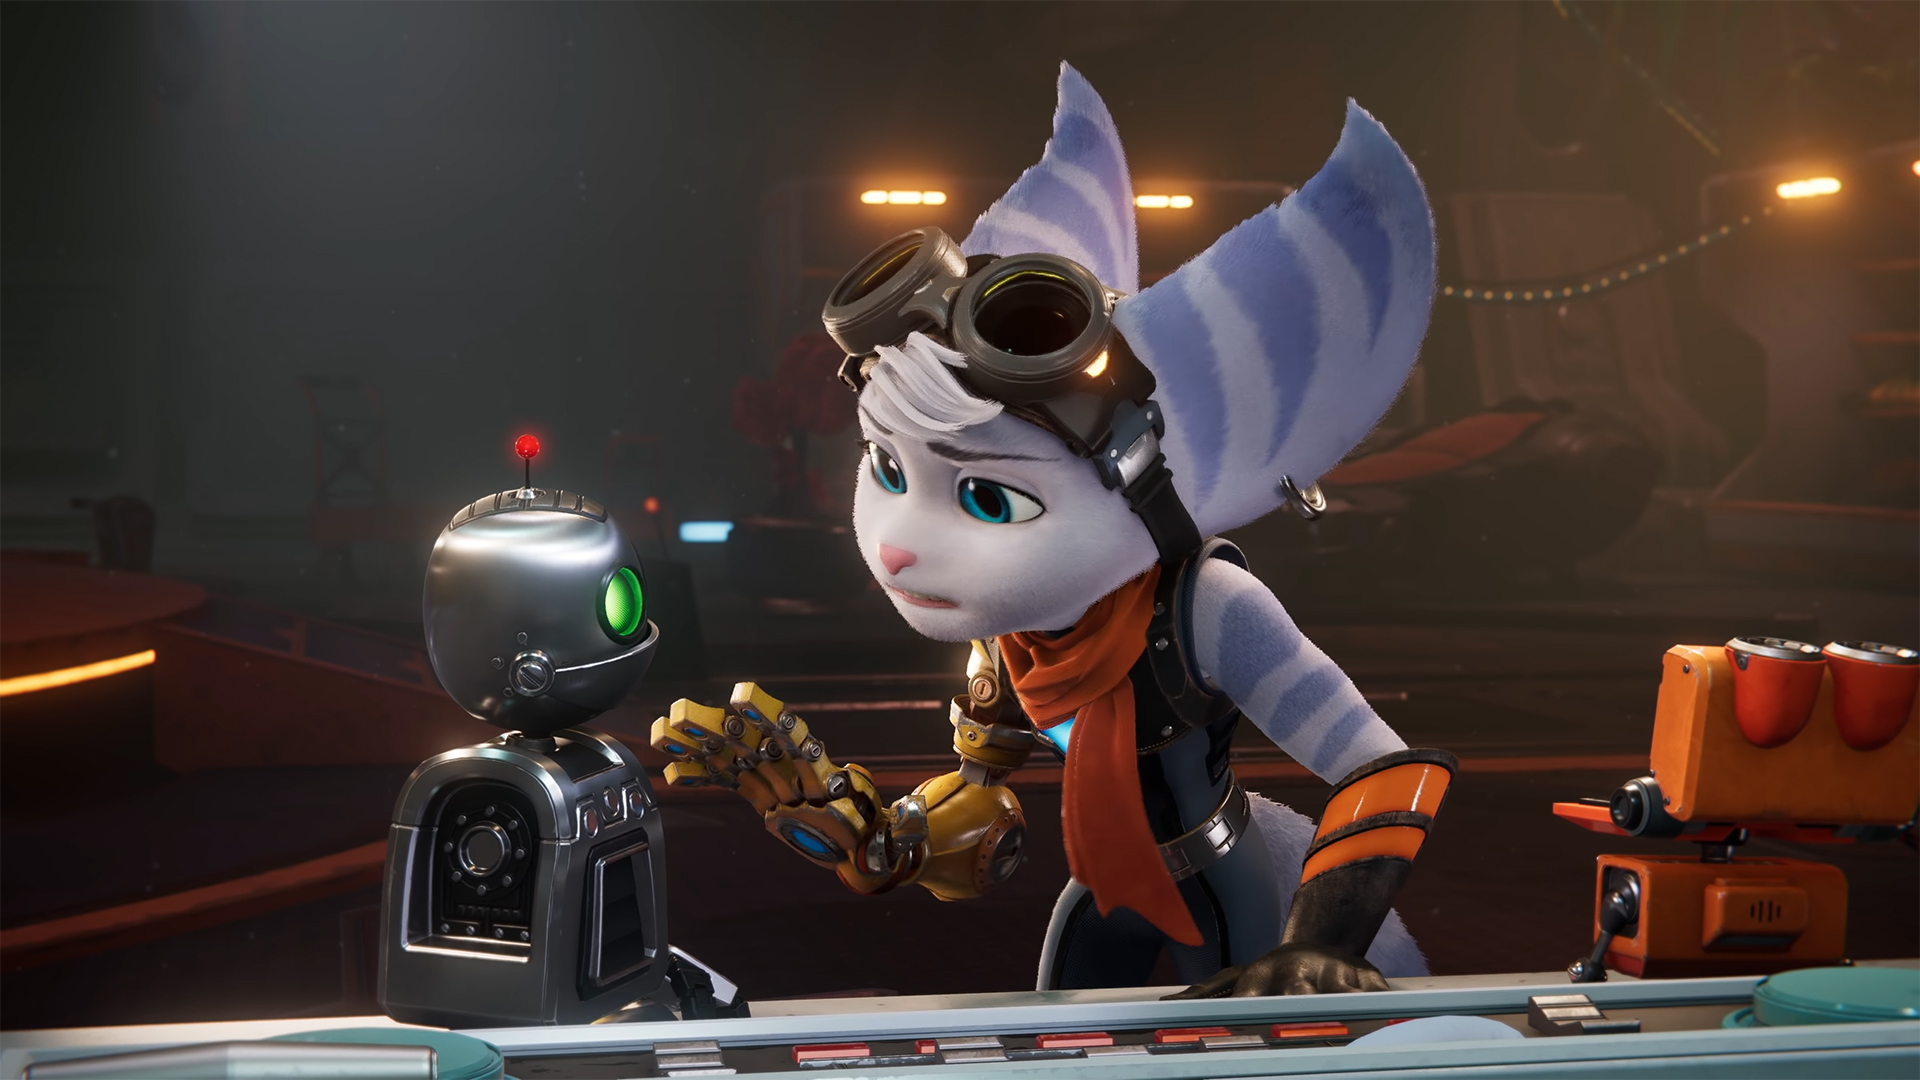 ratchet and clank rivet icon